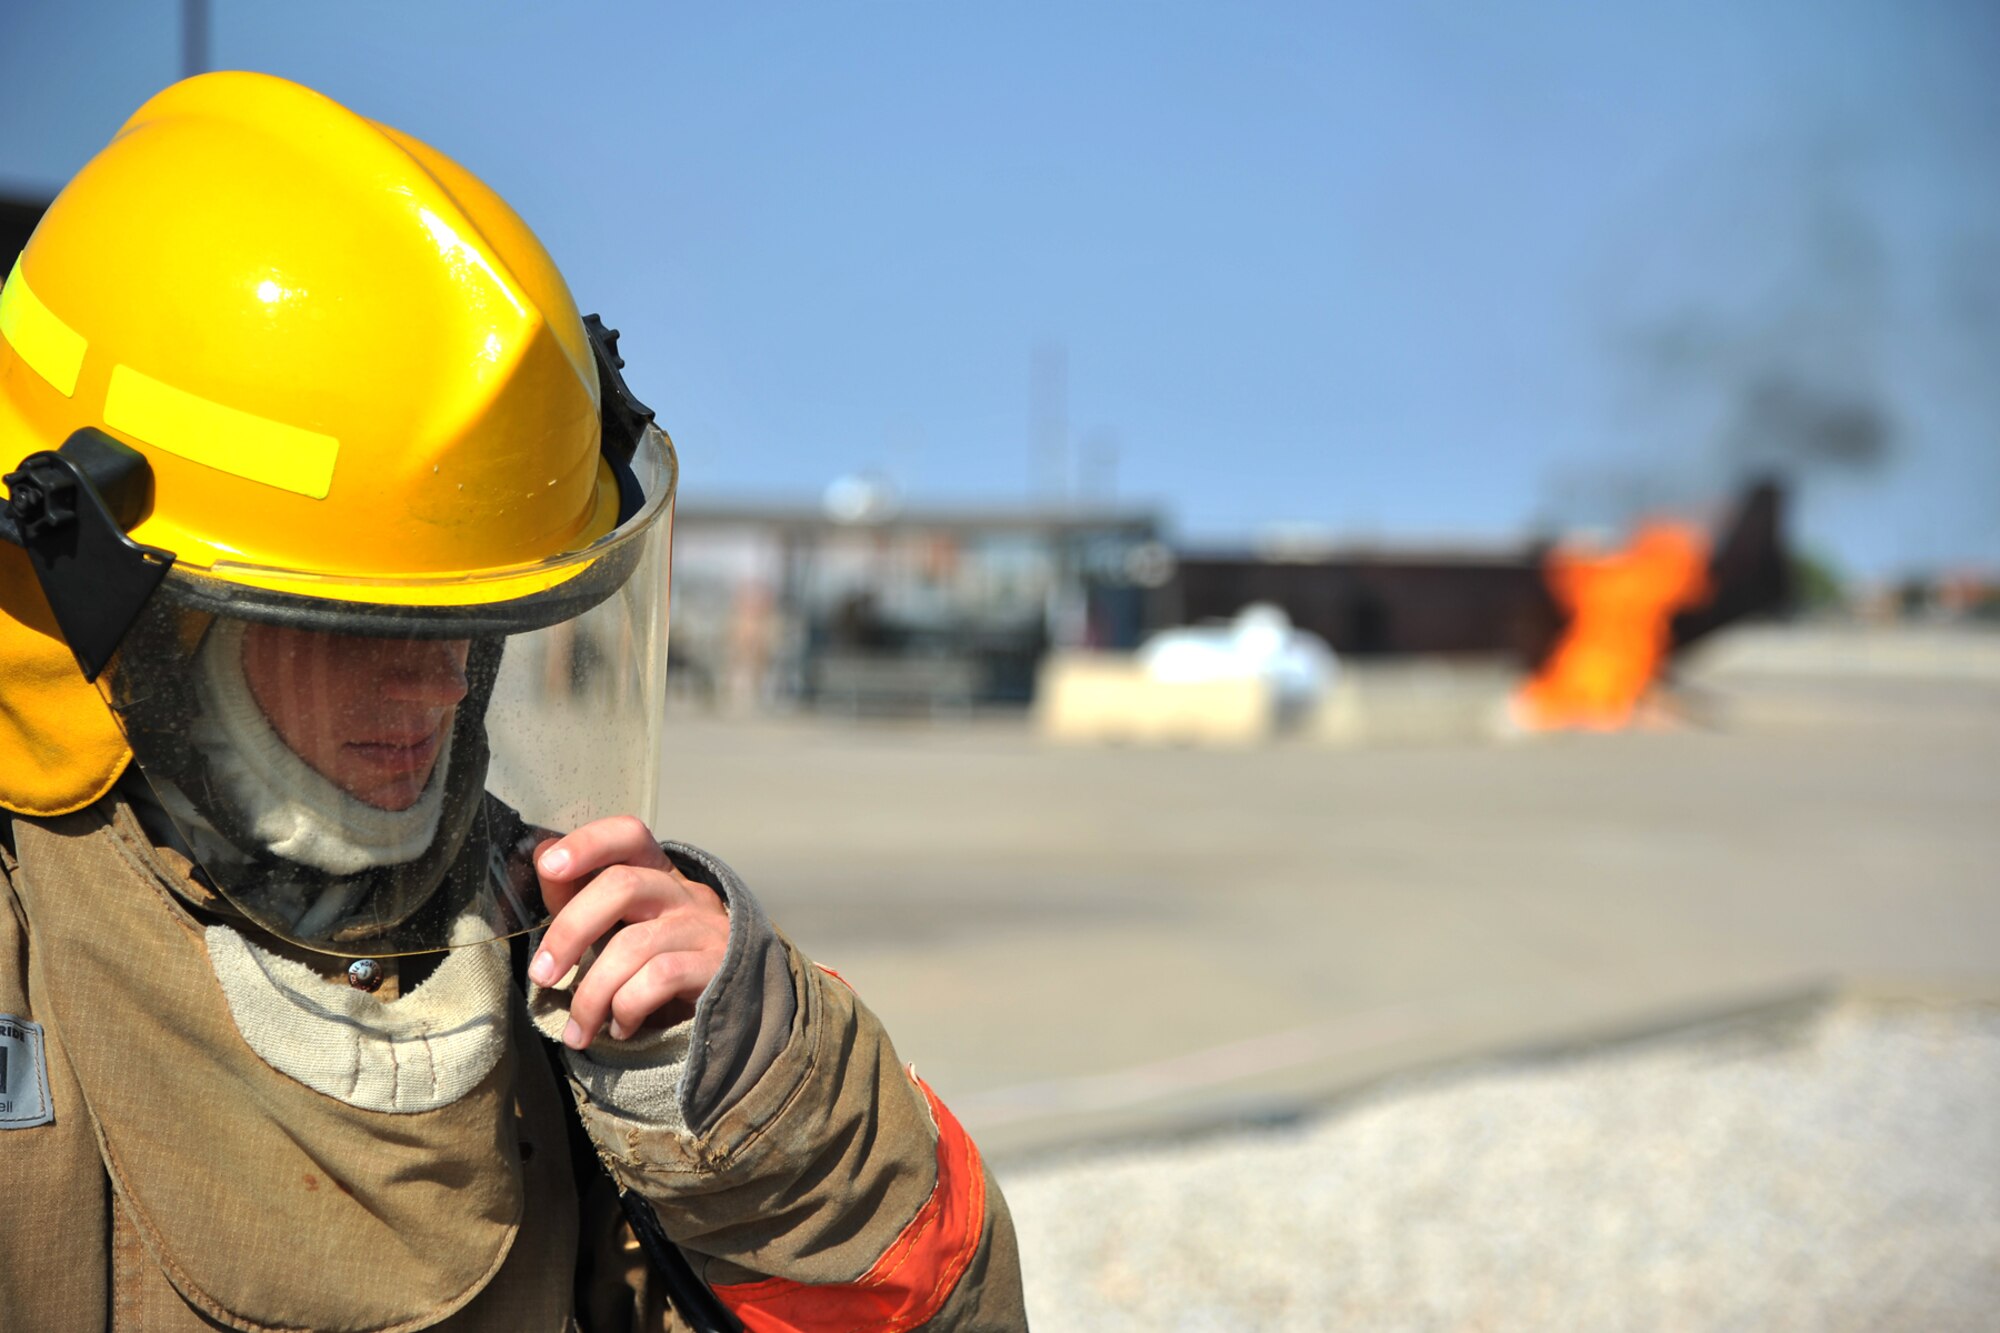 GOODFELLOW AIR FORCE BASE, Texas - Airman 1st Class Britt Beshear, 312th Training Squadron student, adjusts his helmet at the Louis F. Garland Department of Defense Fire Academy Sept. 6. The Academy services all aspects of the DoD; including Army, Marine Corps, Navy, Air Force, and Civil Service employees. (U.S. Air Force/ Senior Airman Michael Smith)